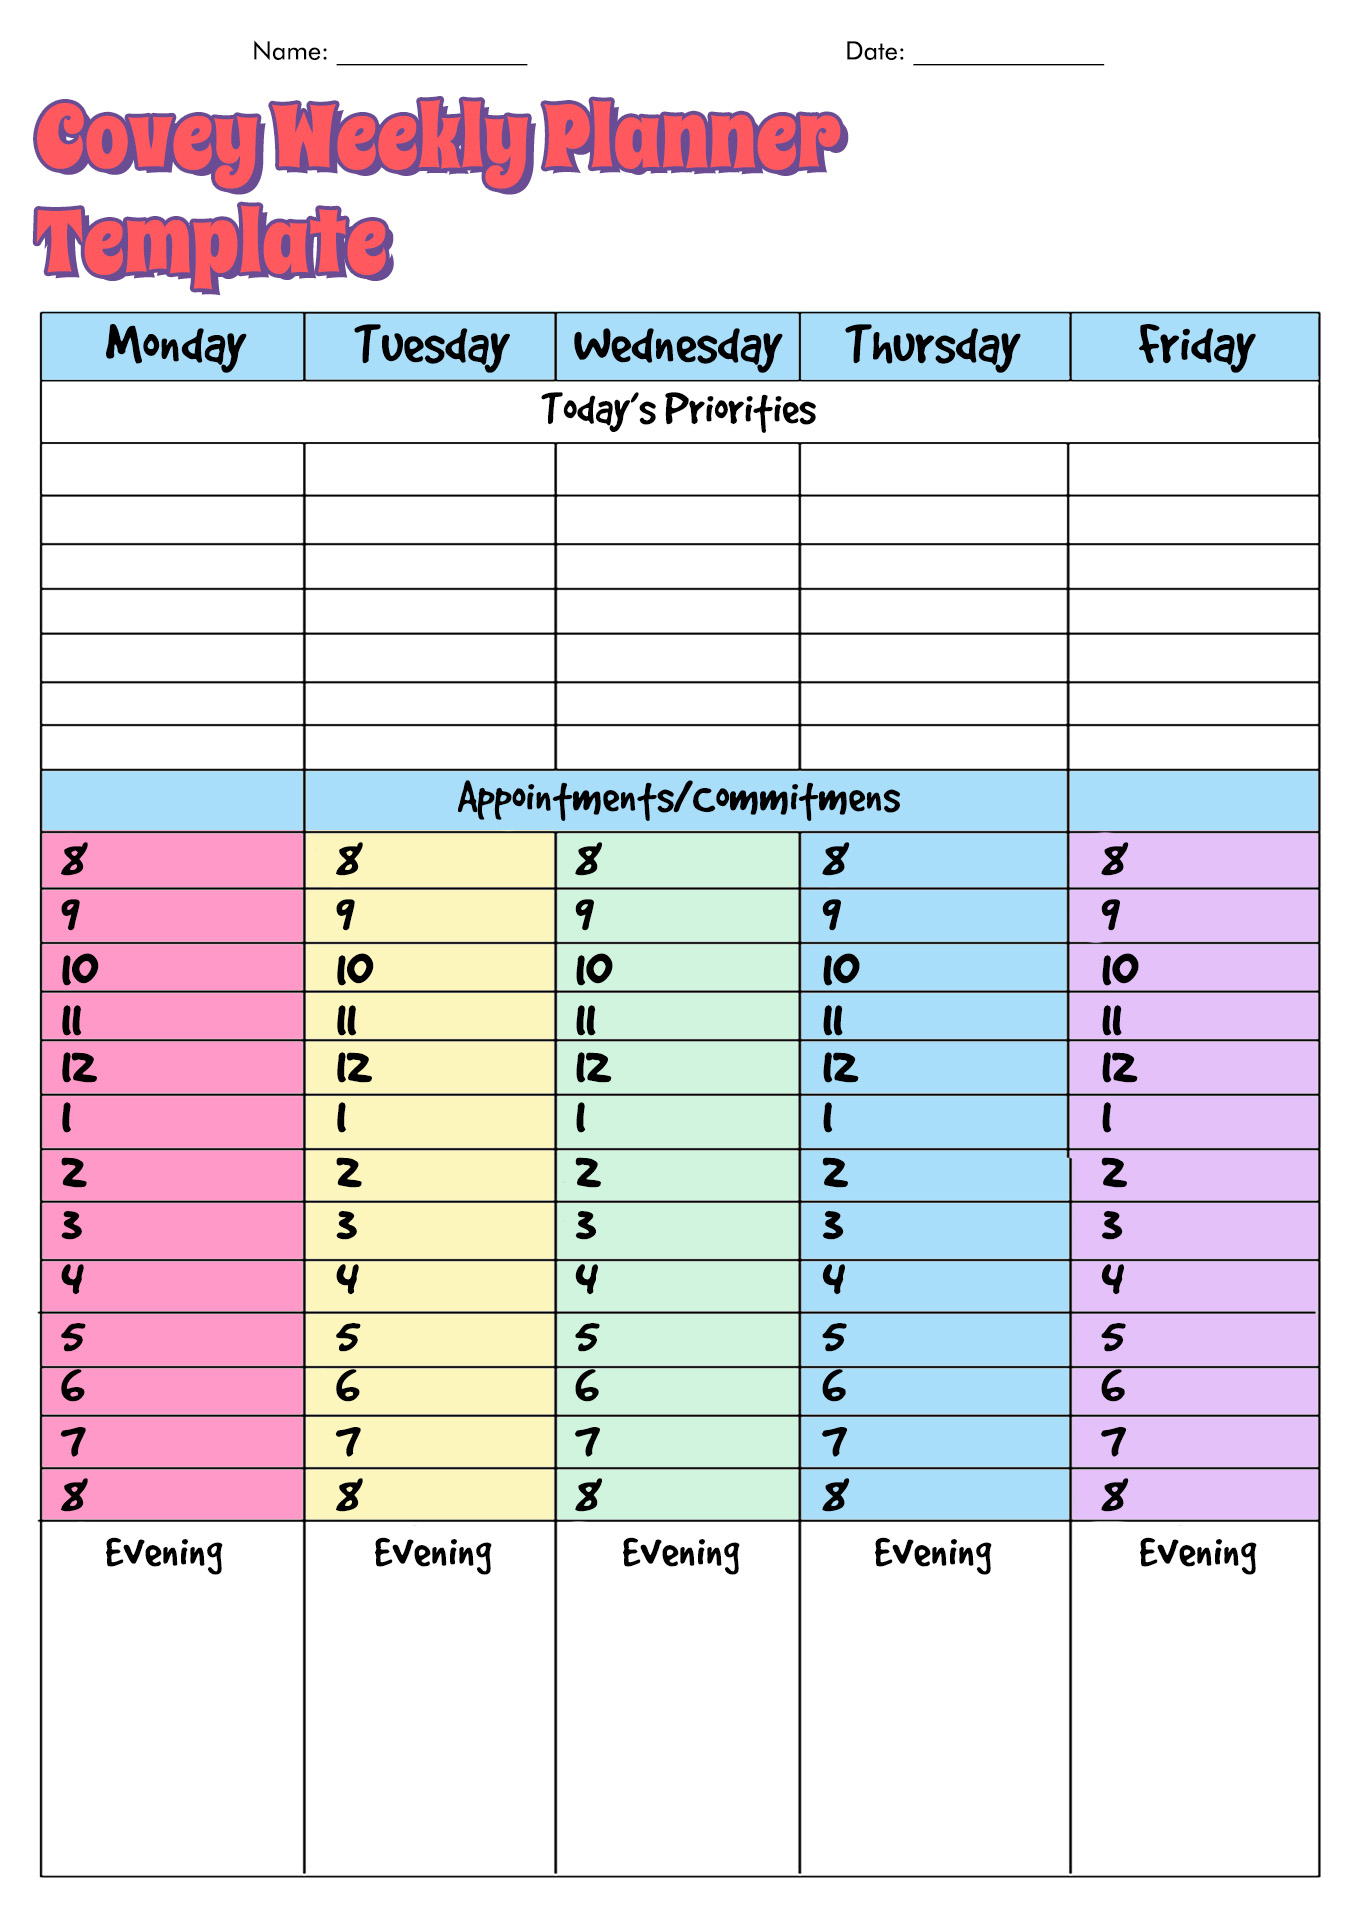 Covey Weekly Planner Template